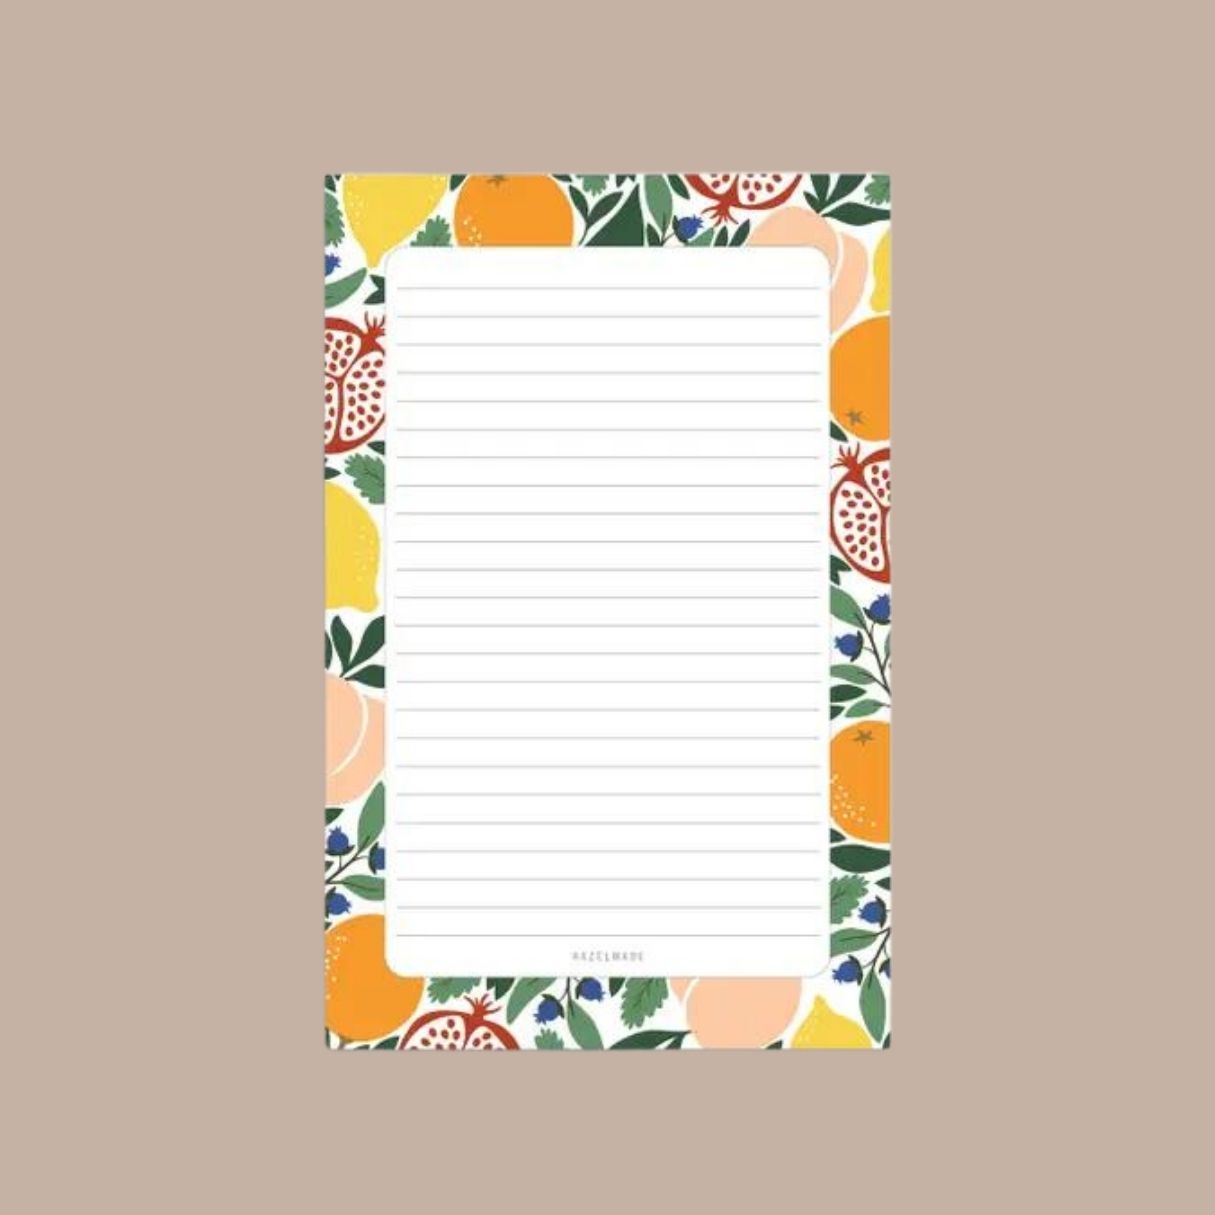 Fruits Memo Pad - Hazelmade - Box Builder Item - KINSHIP GIFT - Desk Essentials, hazelmade, housewarming, LDT:GW:RESTRICT, office - Pittsburgh - gift - boxes - gift - baskets - corporate - gifts - holiday - gifts